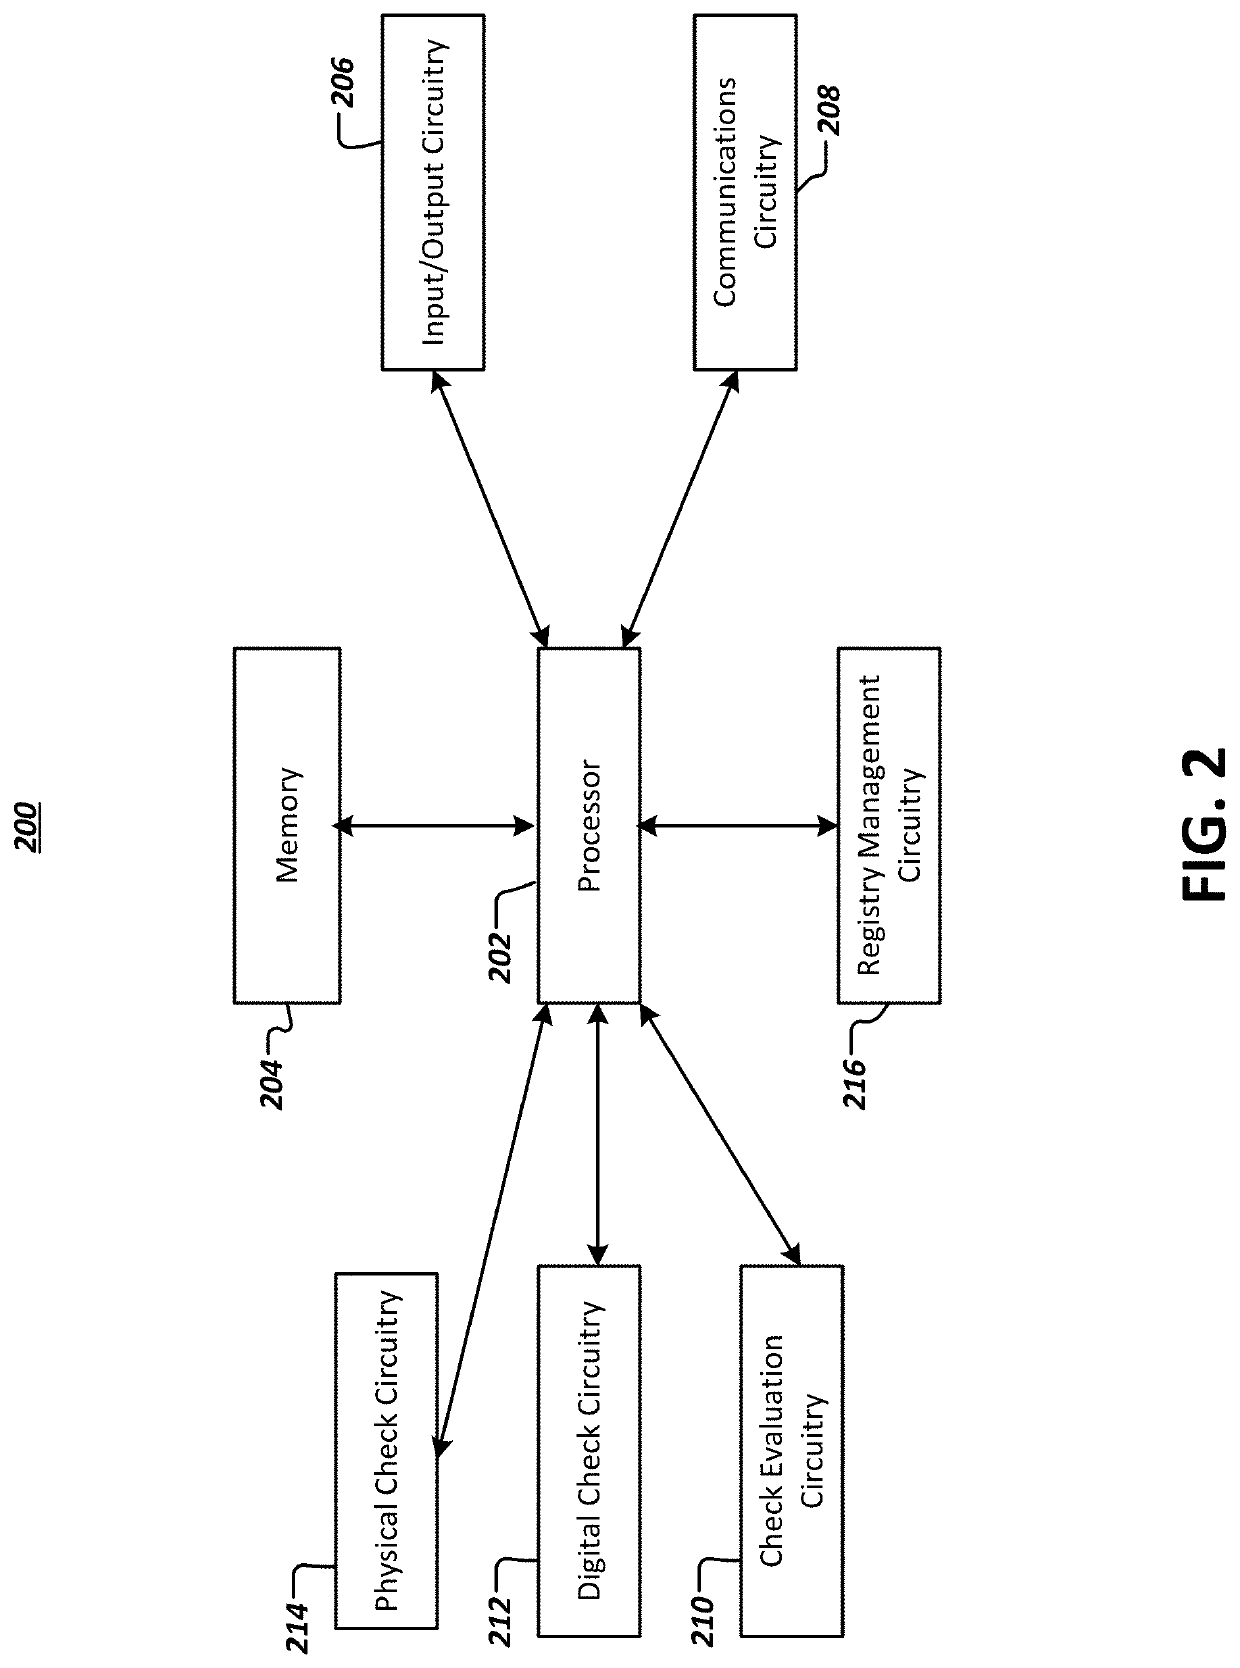 Apparatuses and methods for generating a unified digital check register